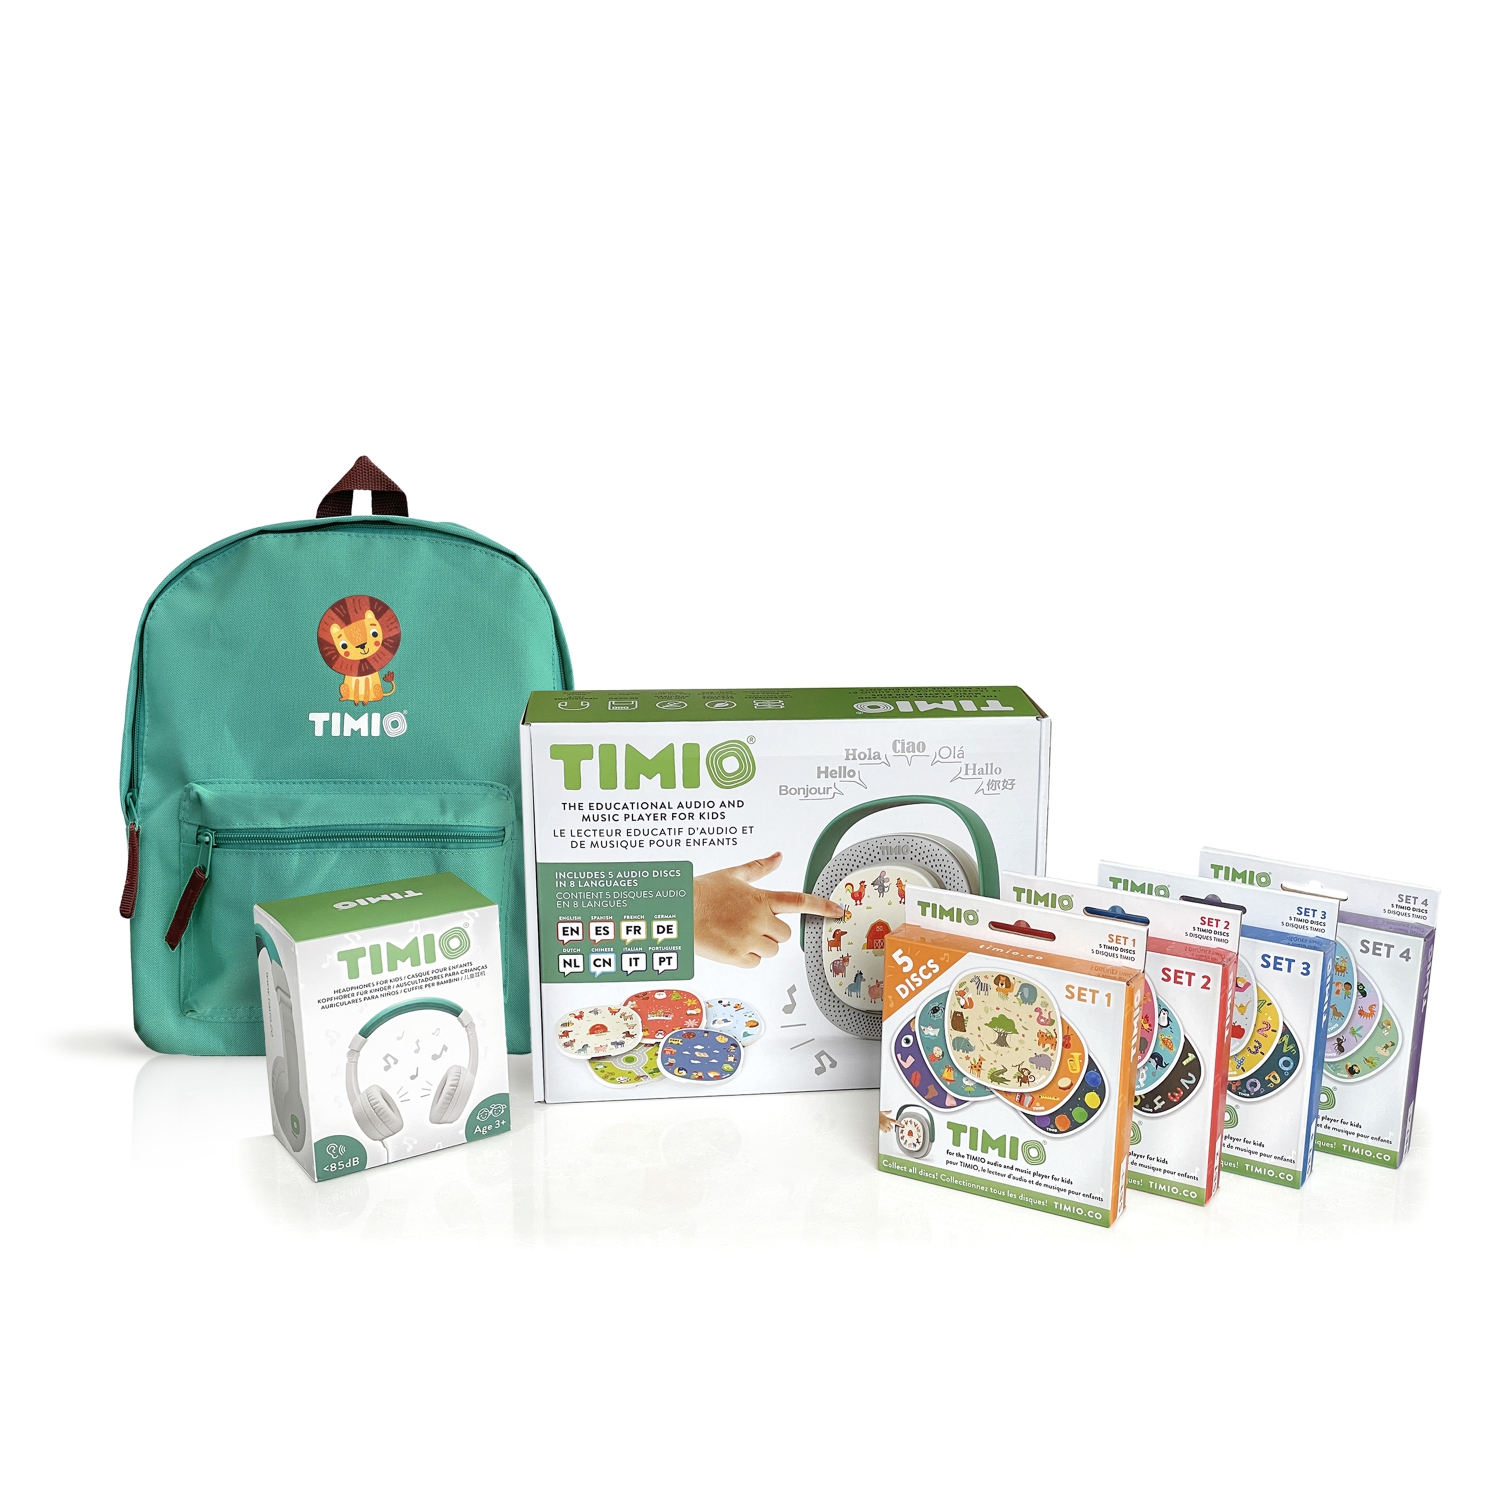 Order the Timio Audio and Music Player + 5 Discs online - Baby Plus